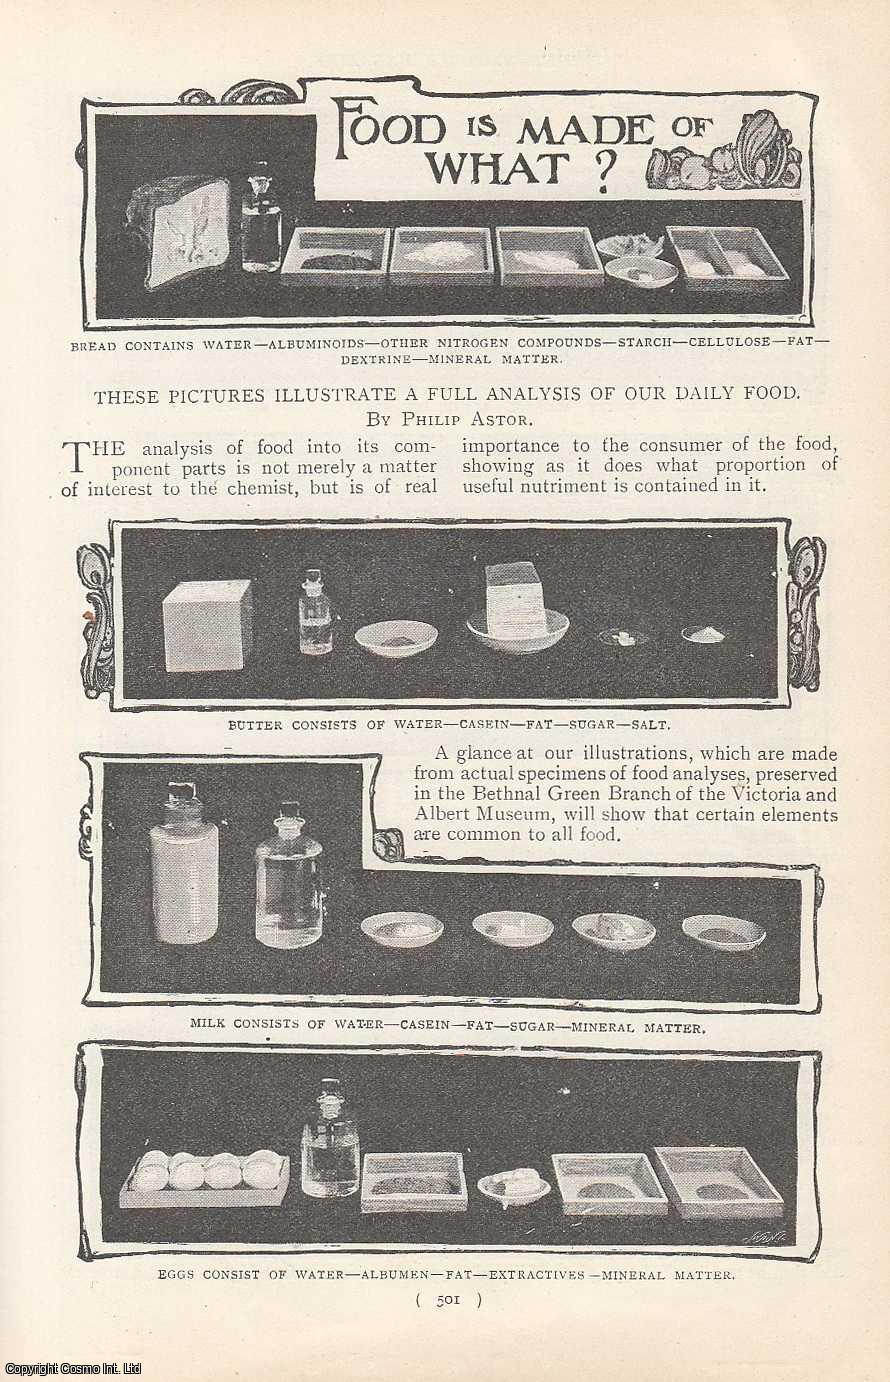 Philip Astor - Food is Made of What : These Pictures Illustrate a Full Analysis of Our Daily Food. An uncommon original article from the Harmsworth London Magazine, 1901.